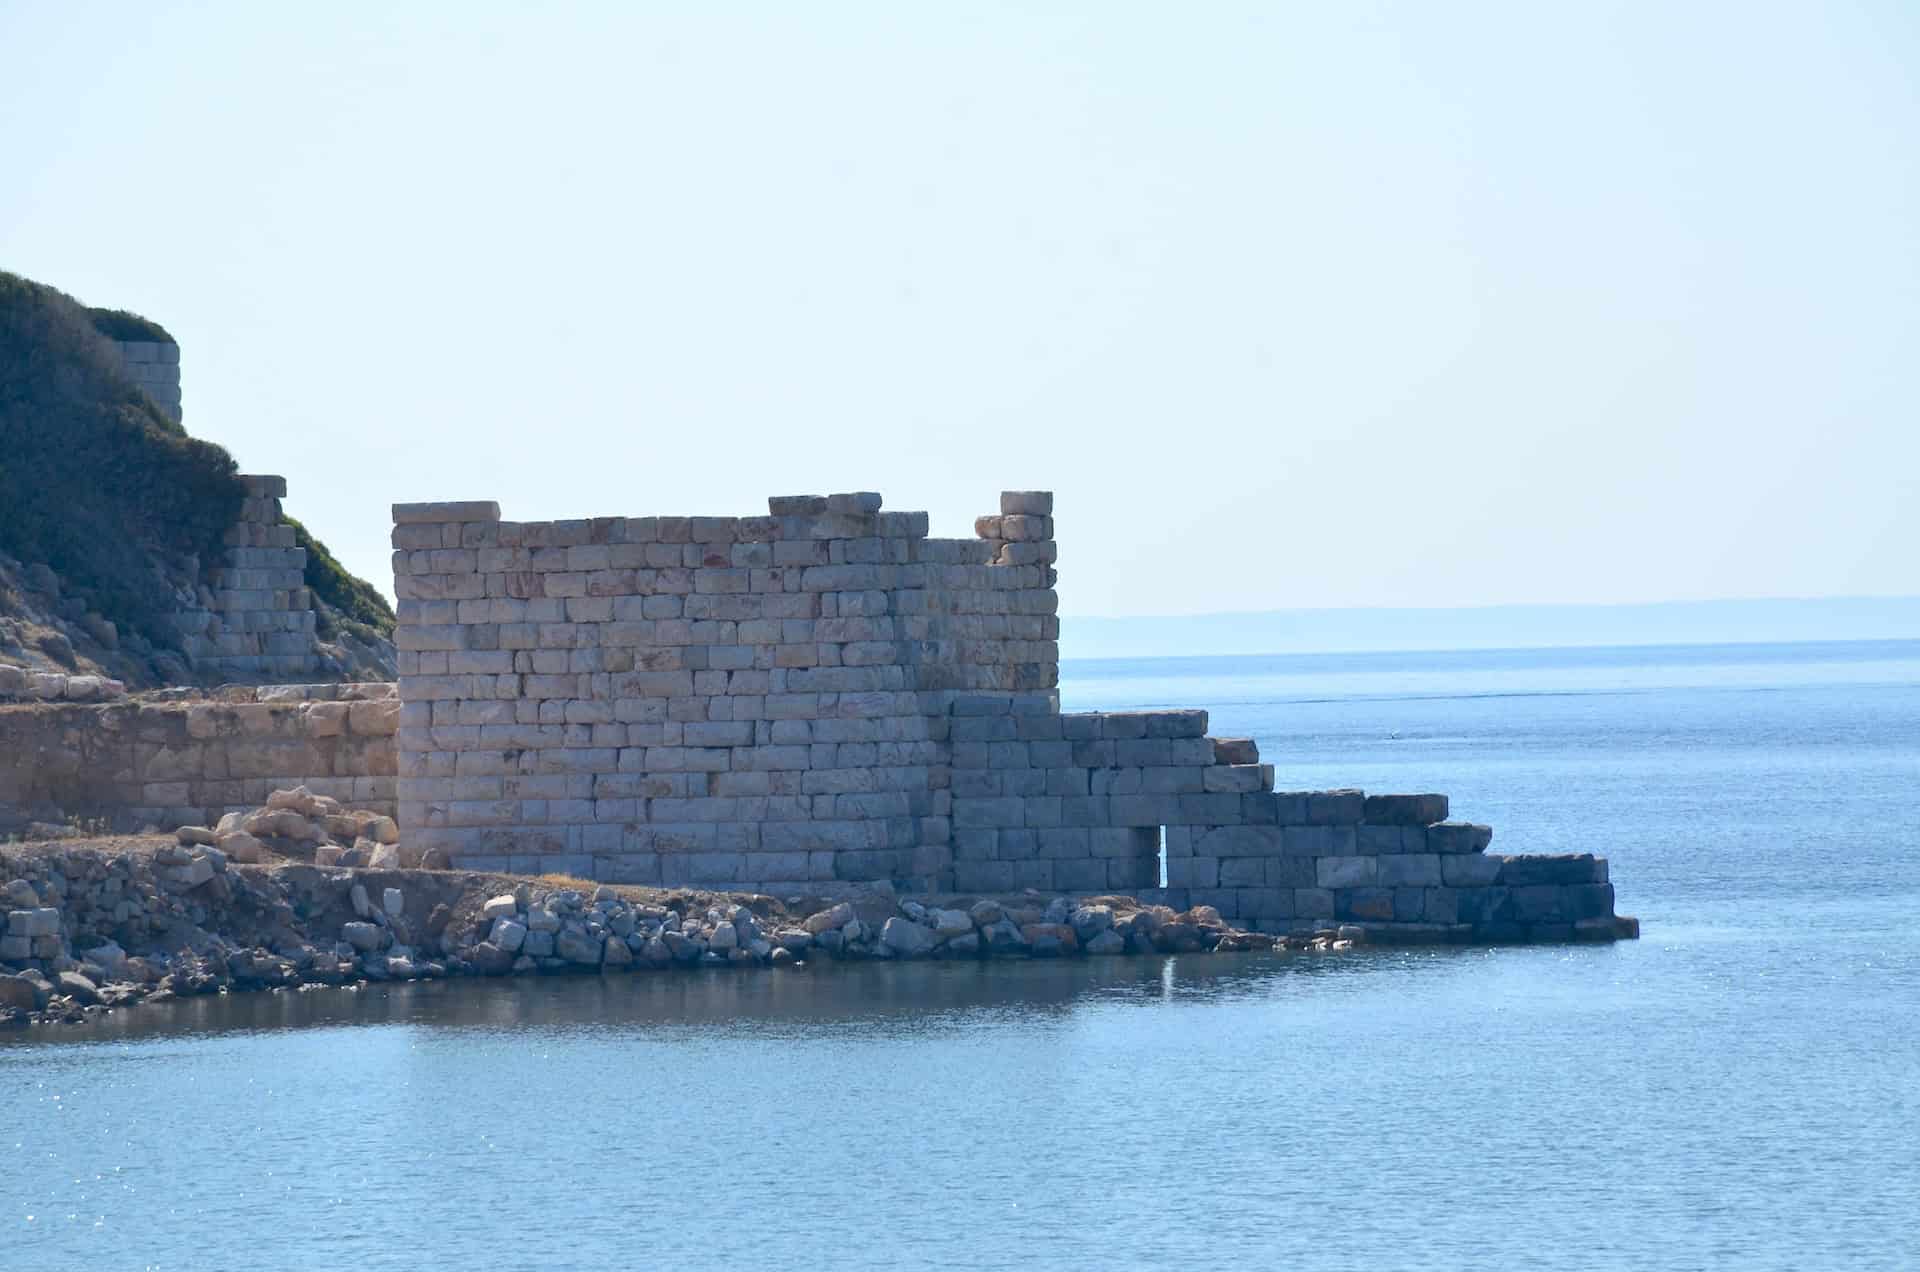 Tower at the entrance of the Military Harbor at Knidos on Datça Peninsula, Turkey